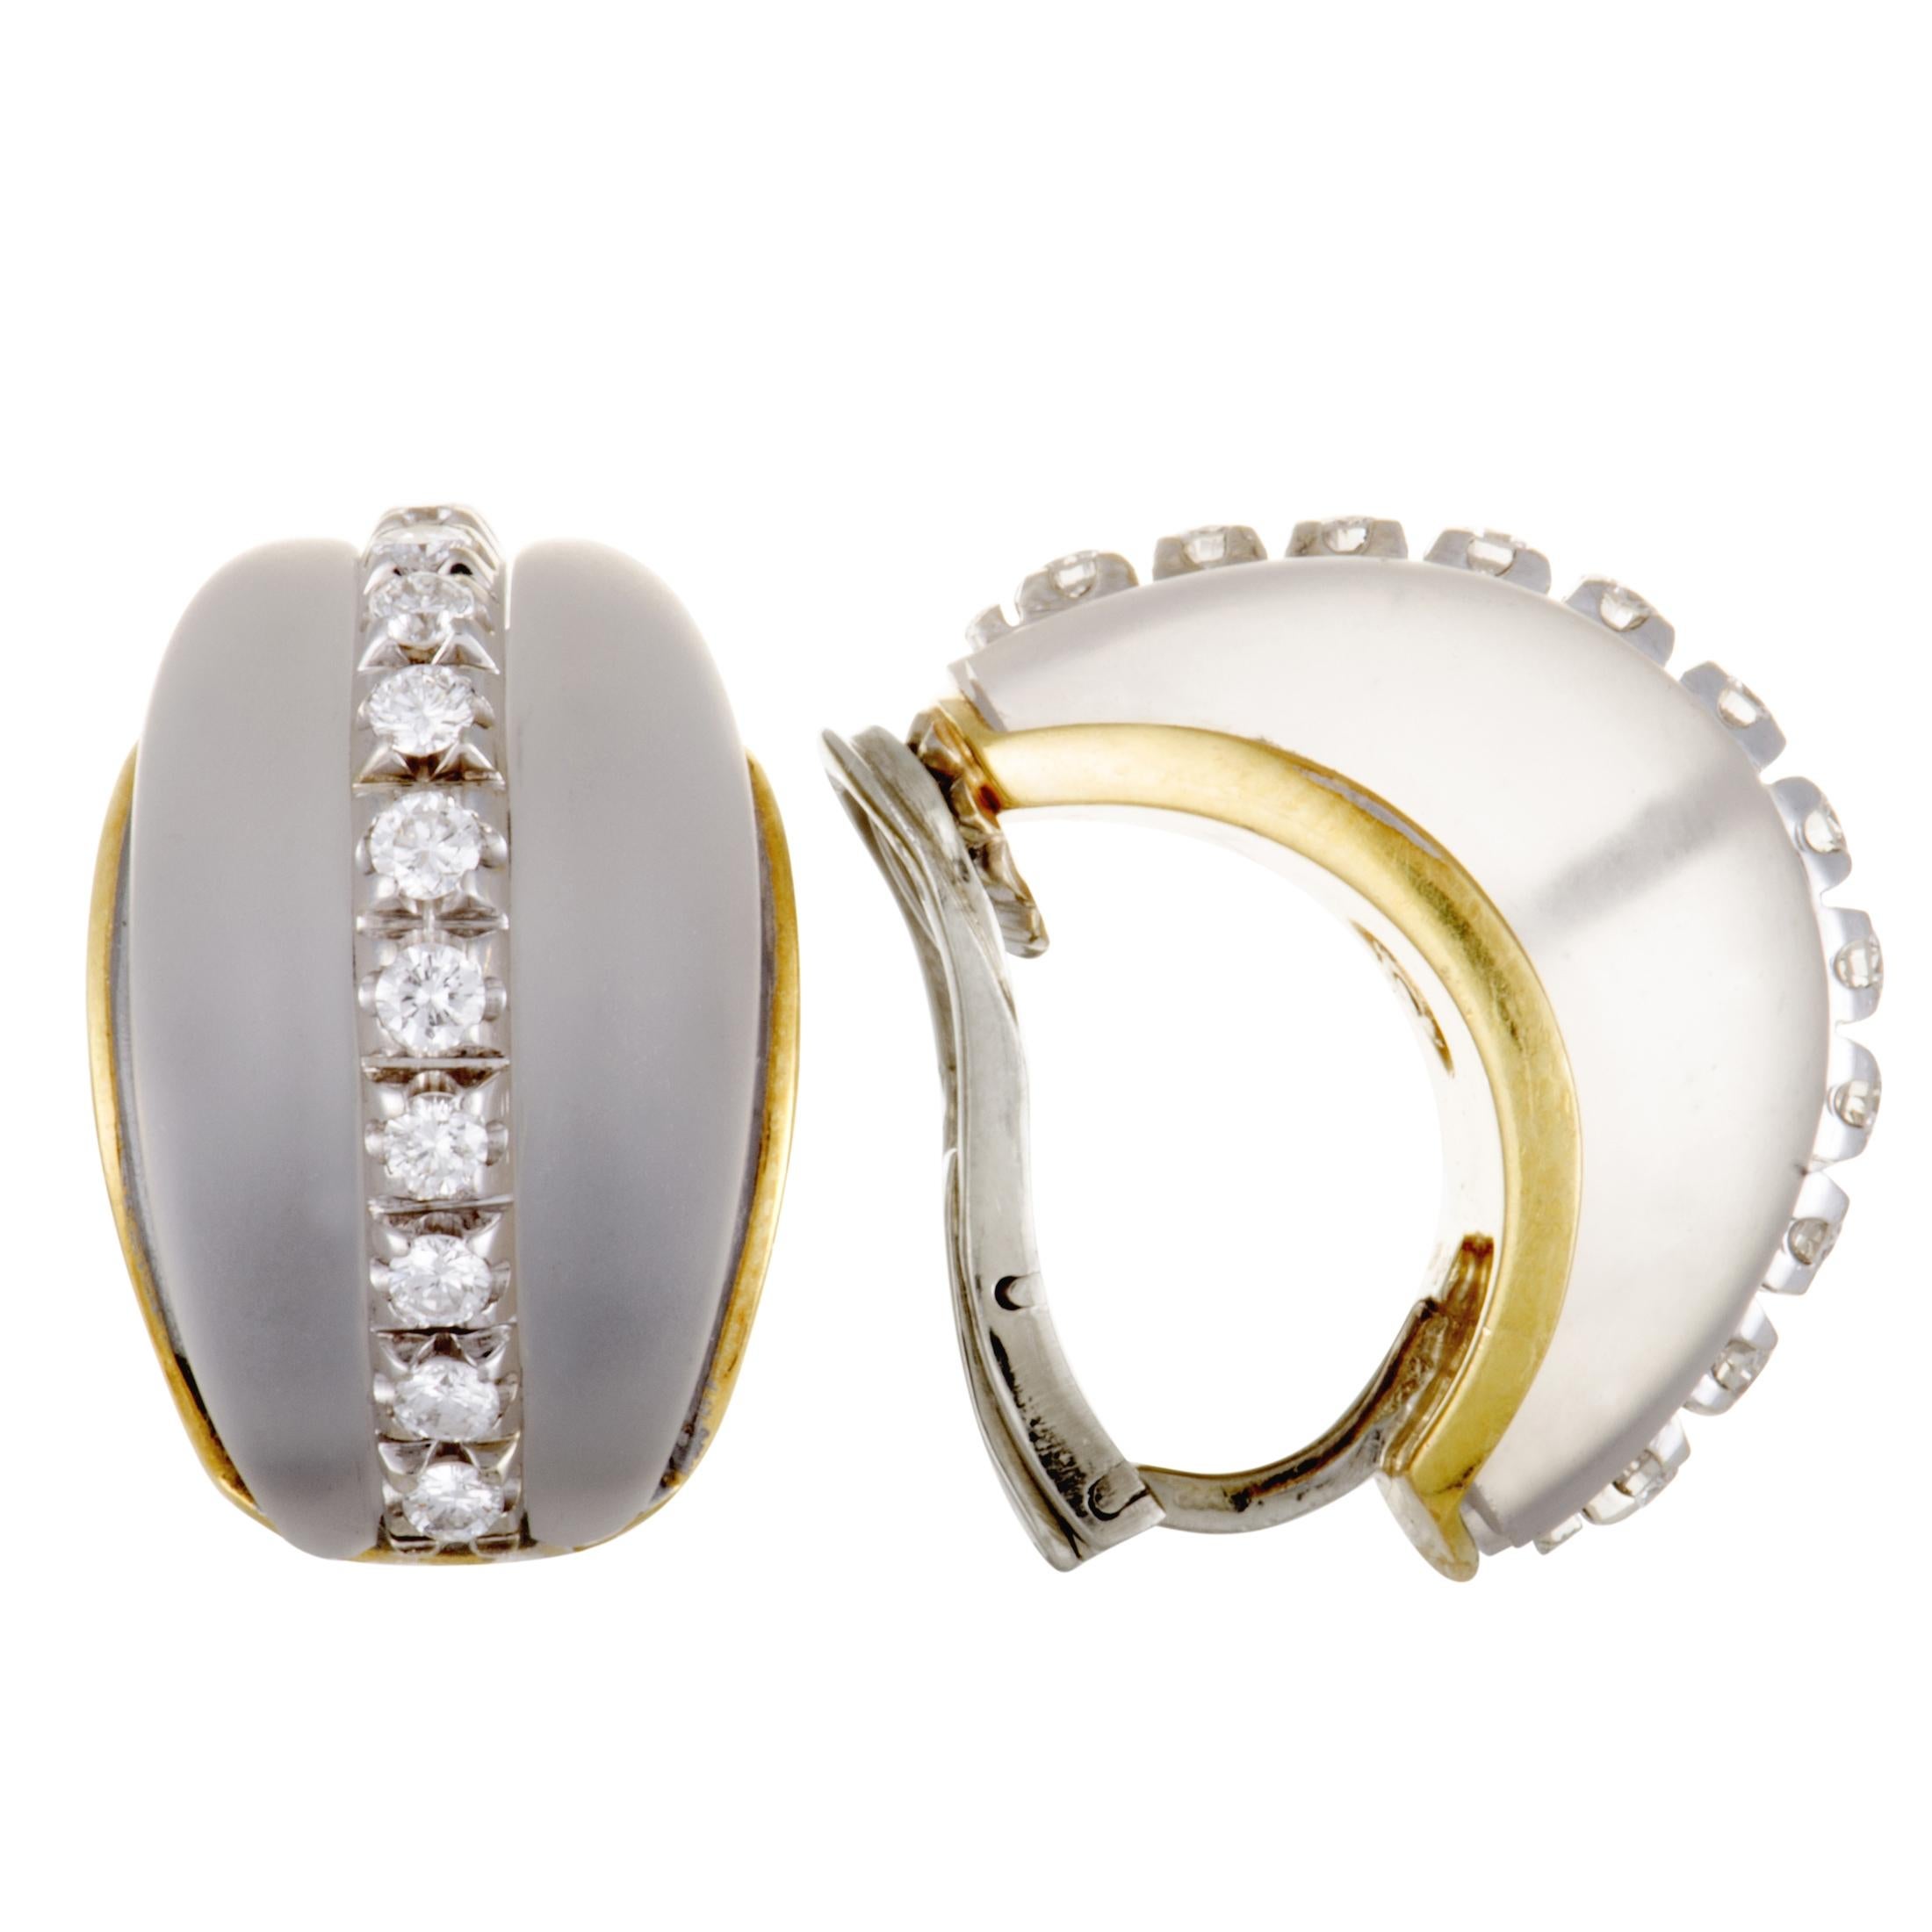 These fabulous Fred of Paris earrings will accentuate your style in an incredibly attractive manner thanks to the imaginative design and eye-catching décor. Made of 18K yellow and 18K white gold, the earrings are set with crystals and with 1.00